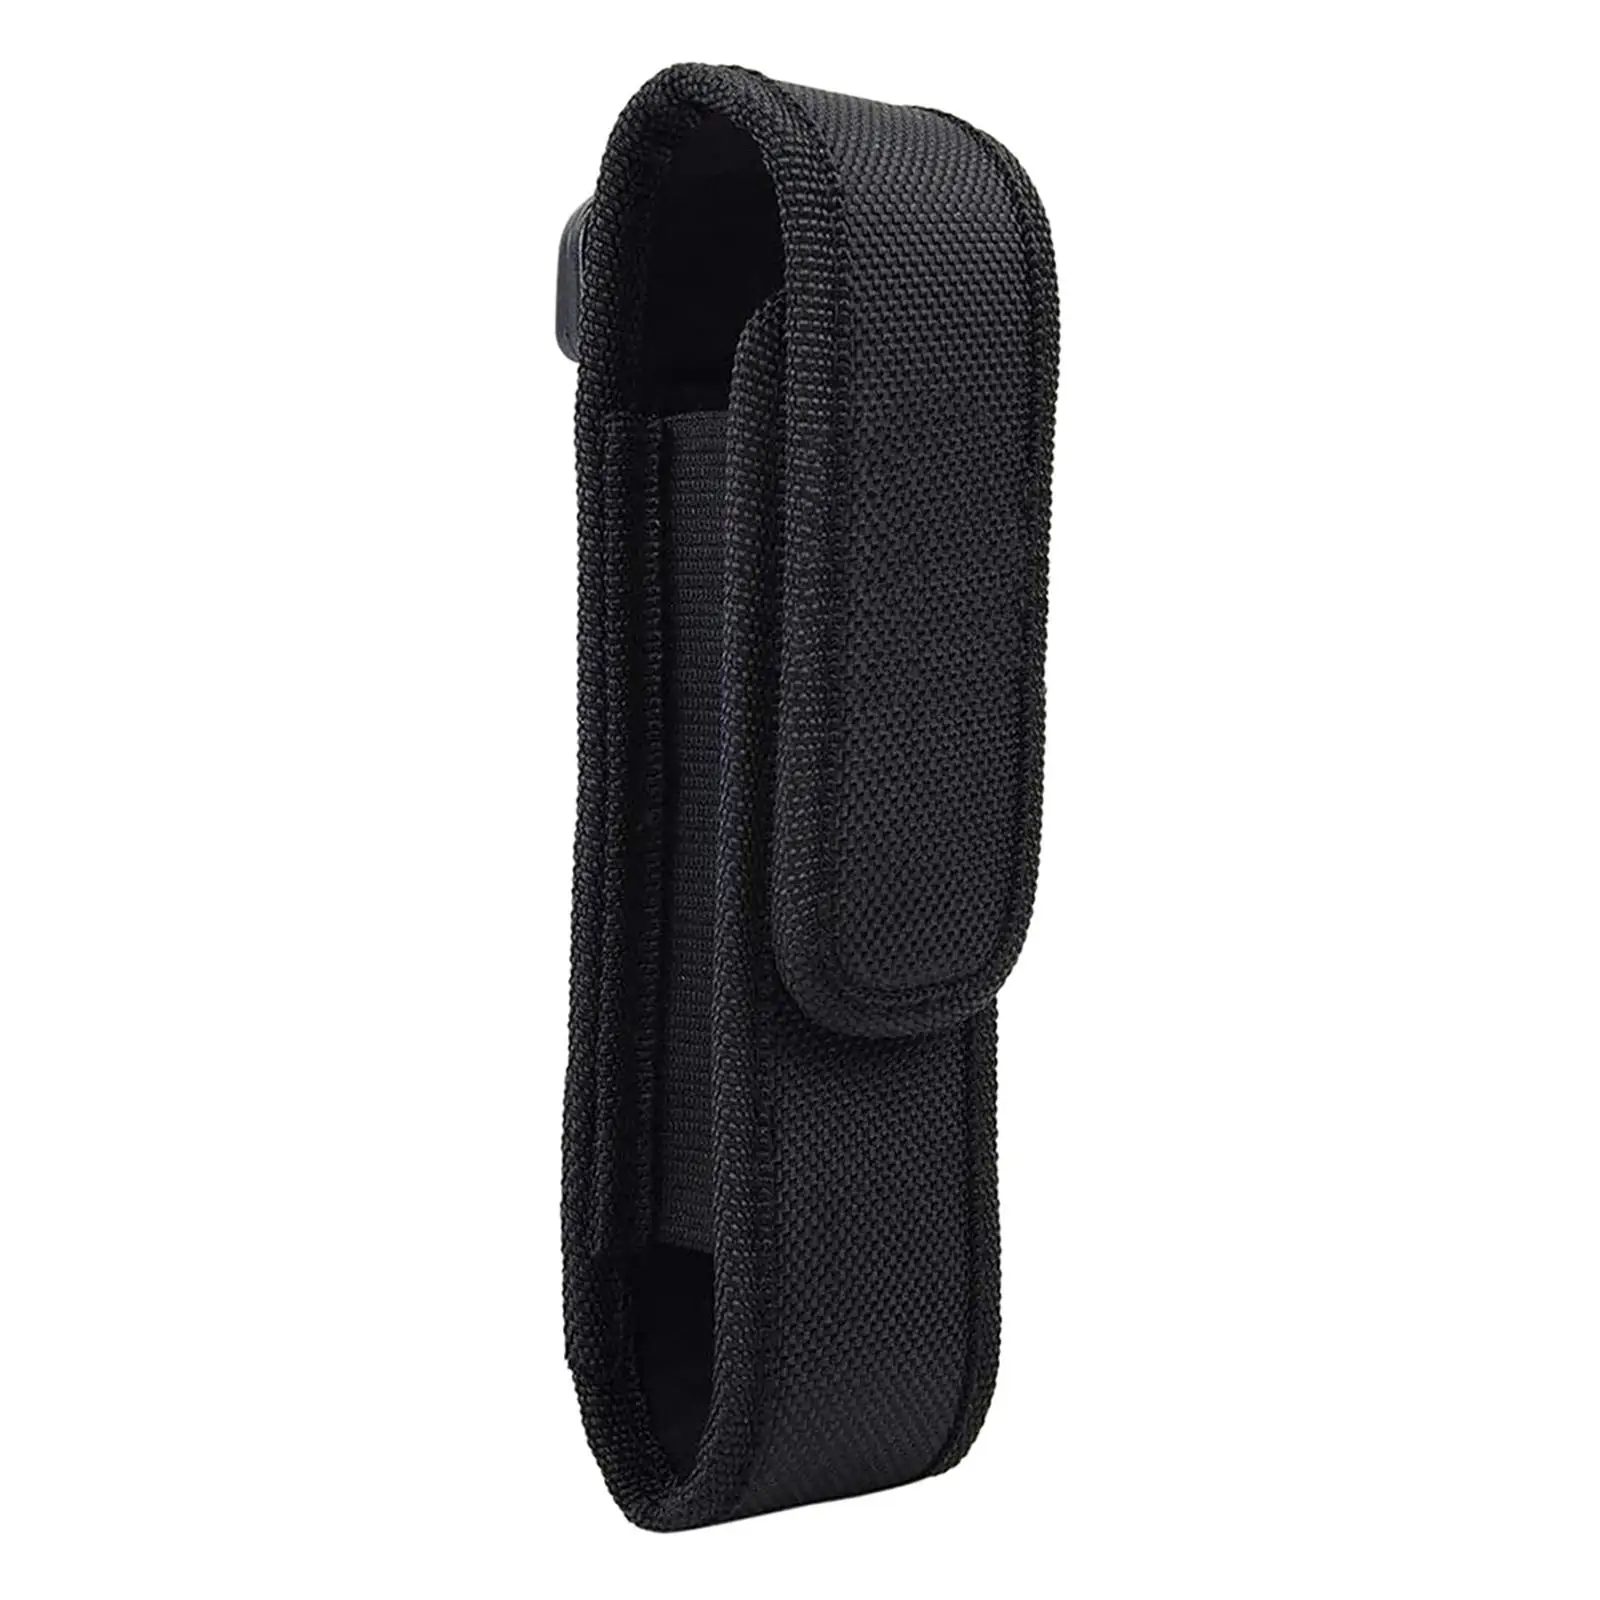 Flashlight Holster Easy to Carry Flashlight Pouch for Hunting Fishing Outdoor Activities